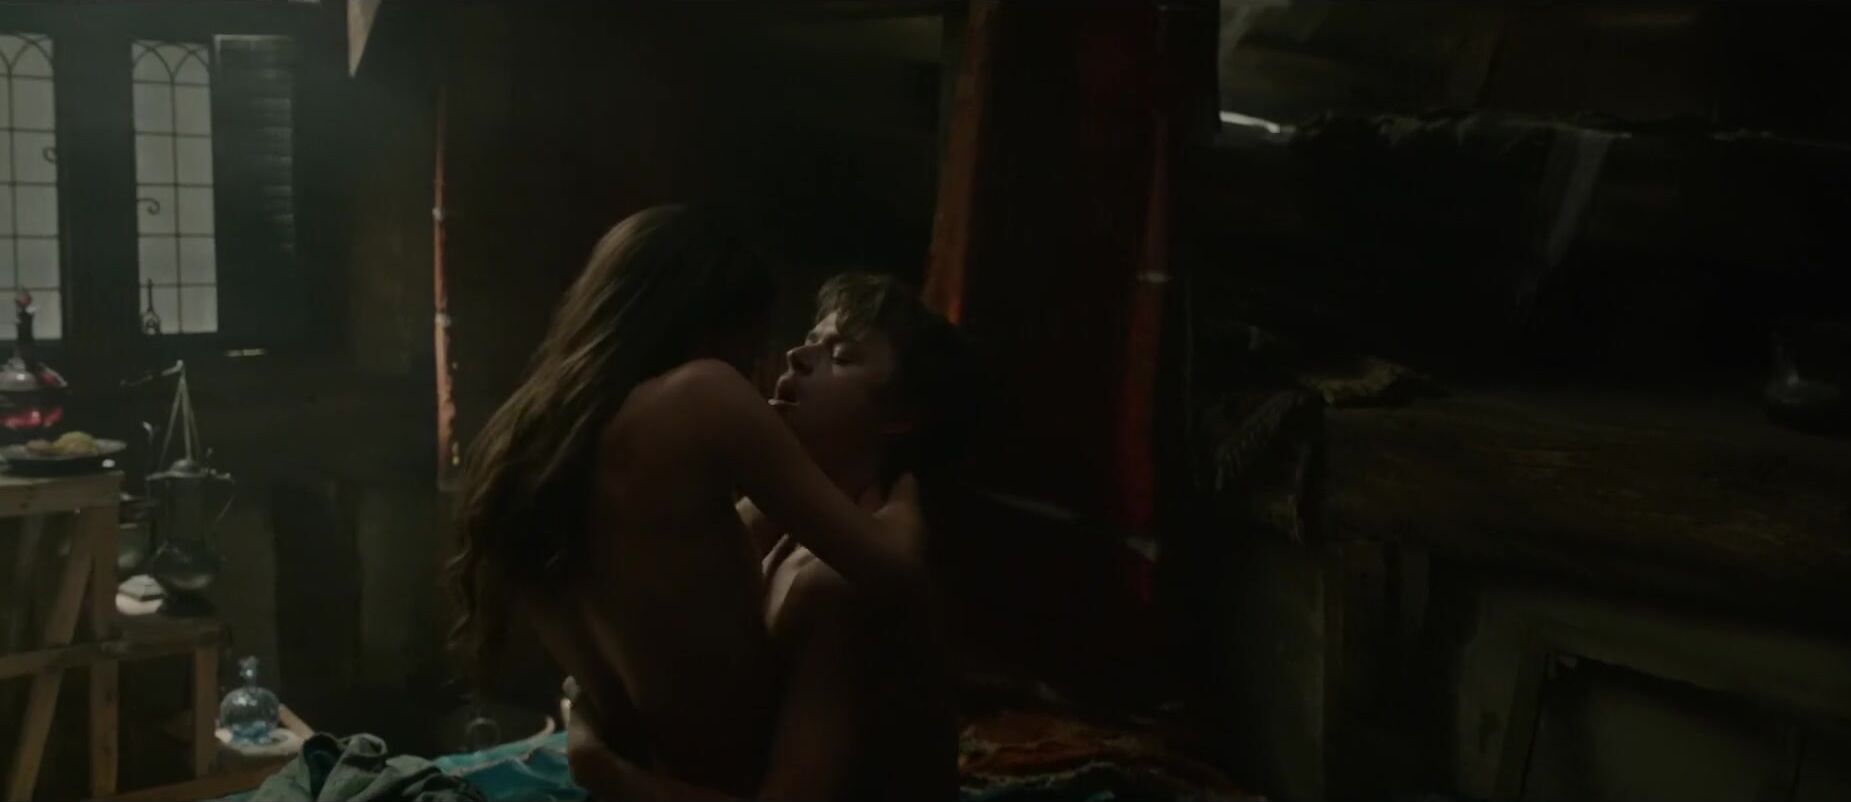 Vivid Hot sex scenes of Alicia Vikander and other actresses being penetrated in Tulip Fever Chile - 2